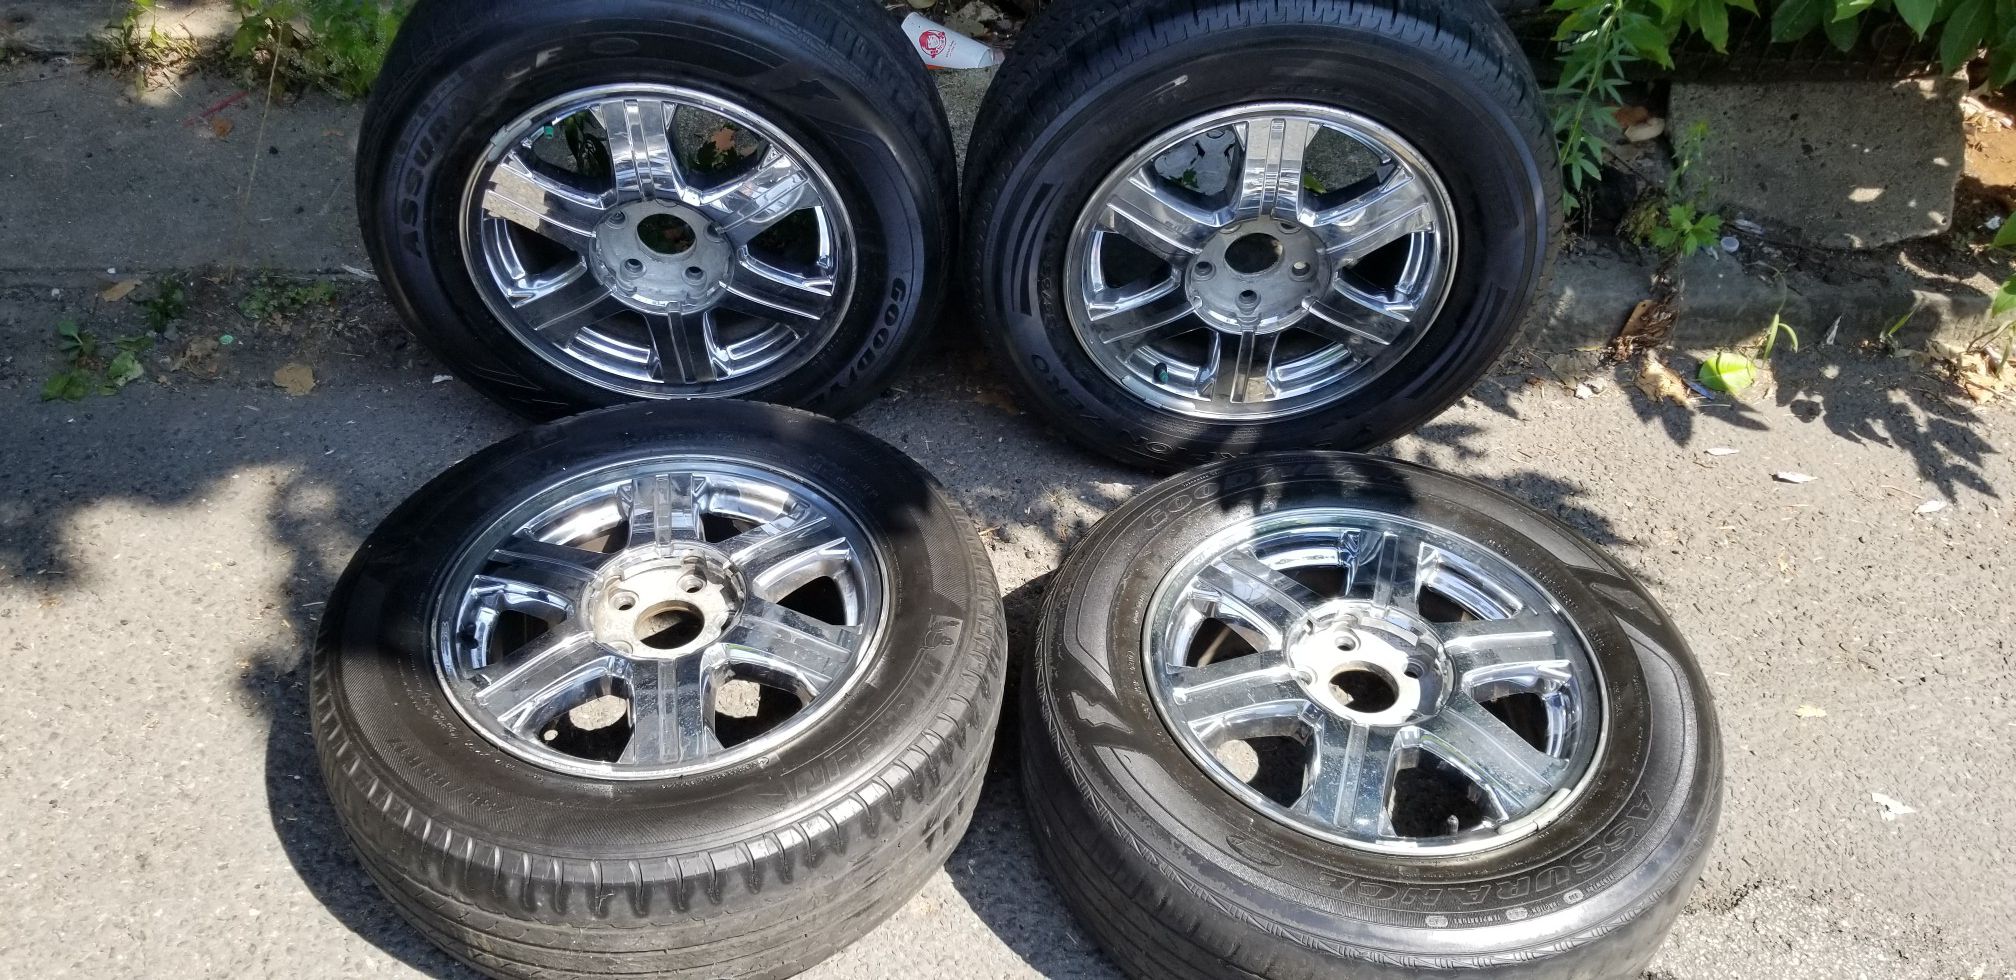 Chrysler pacifica chrome rims & Halo headlights 200.00 only serious inquiries please.